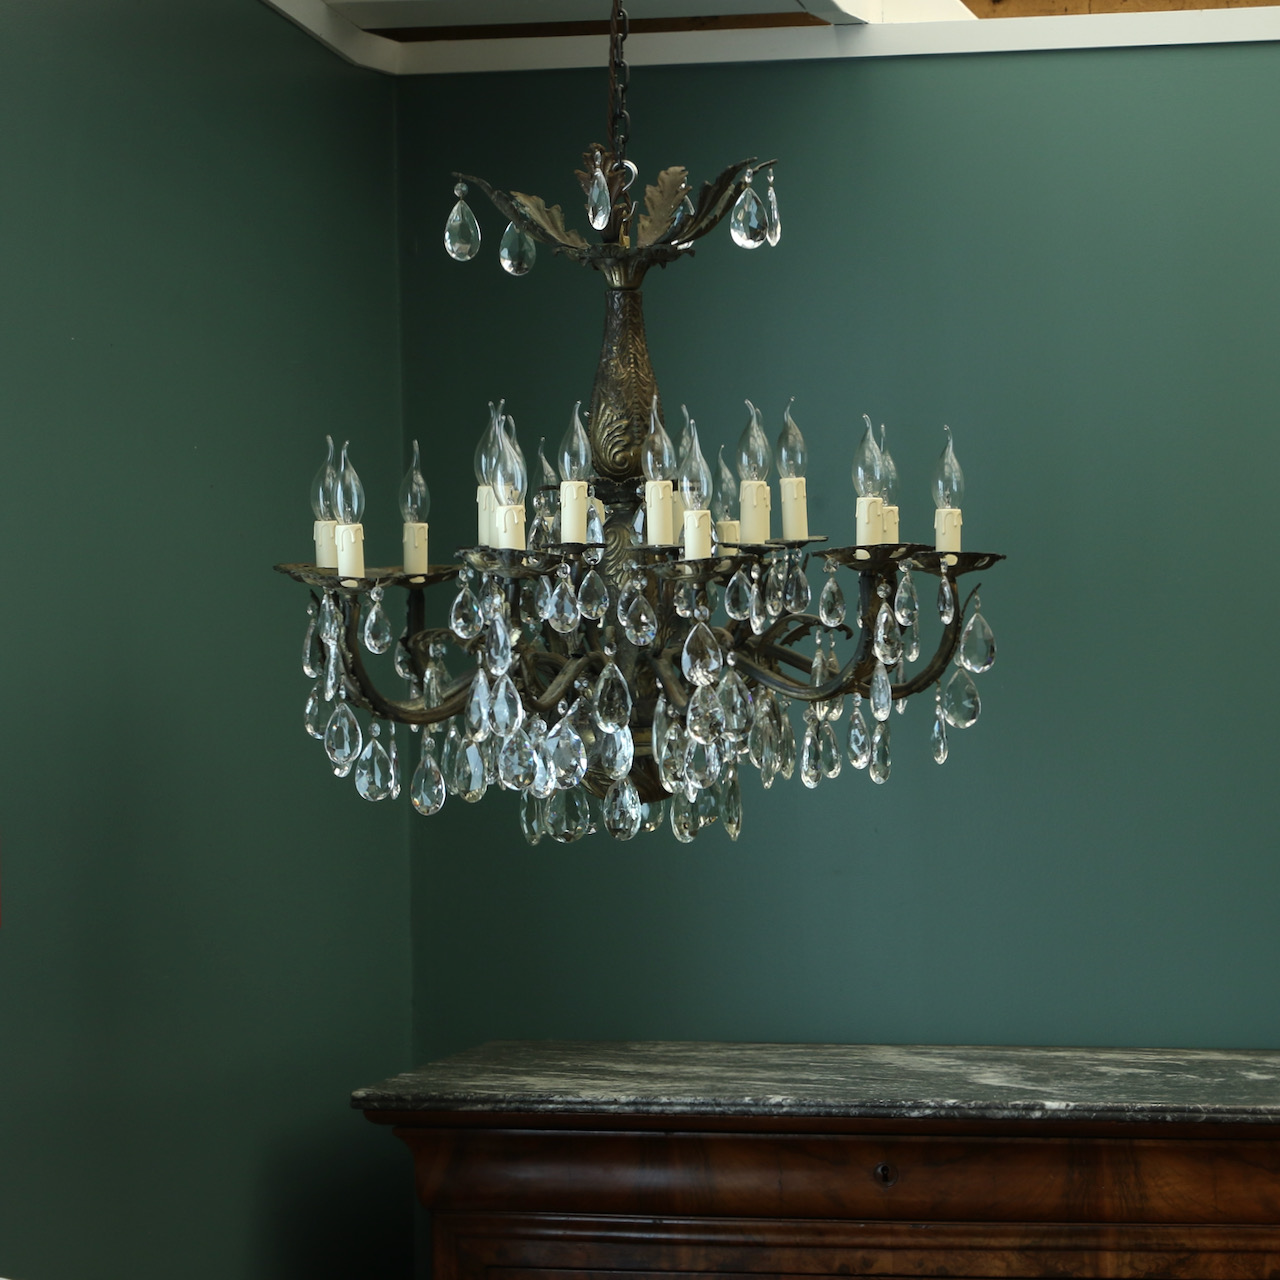 109-11 - A European Chandelier with 20 lights